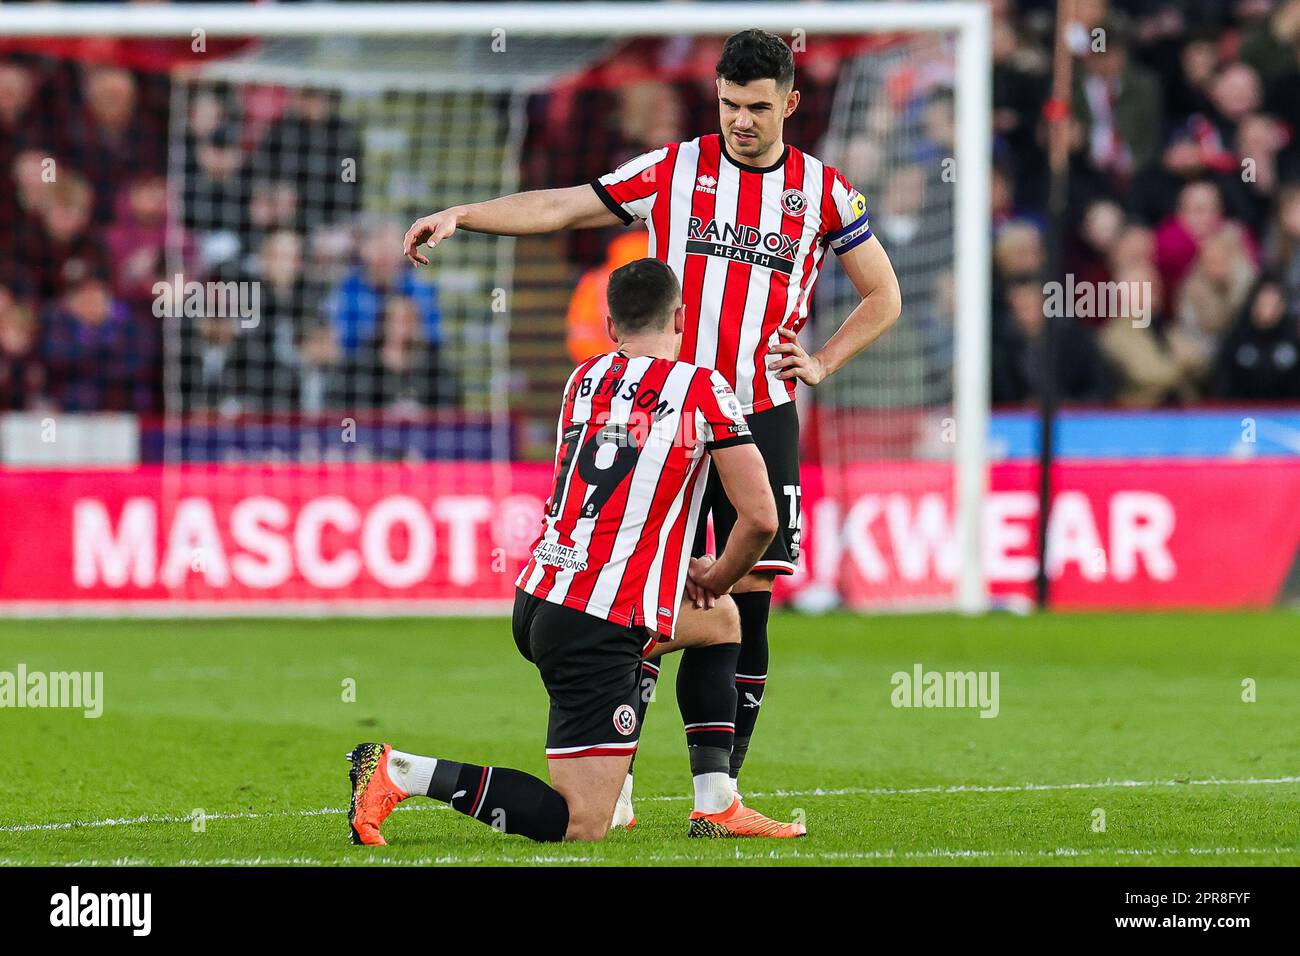 Sheffield United's Jack Robinson (right) tackles Tottenham Hotspur's Pedro  Porro during the Emirates FA Cup fifth round match at Bramall Lane,  Sheffield. Picture date: Wednesday March 1, 2023 Stock Photo - Alamy